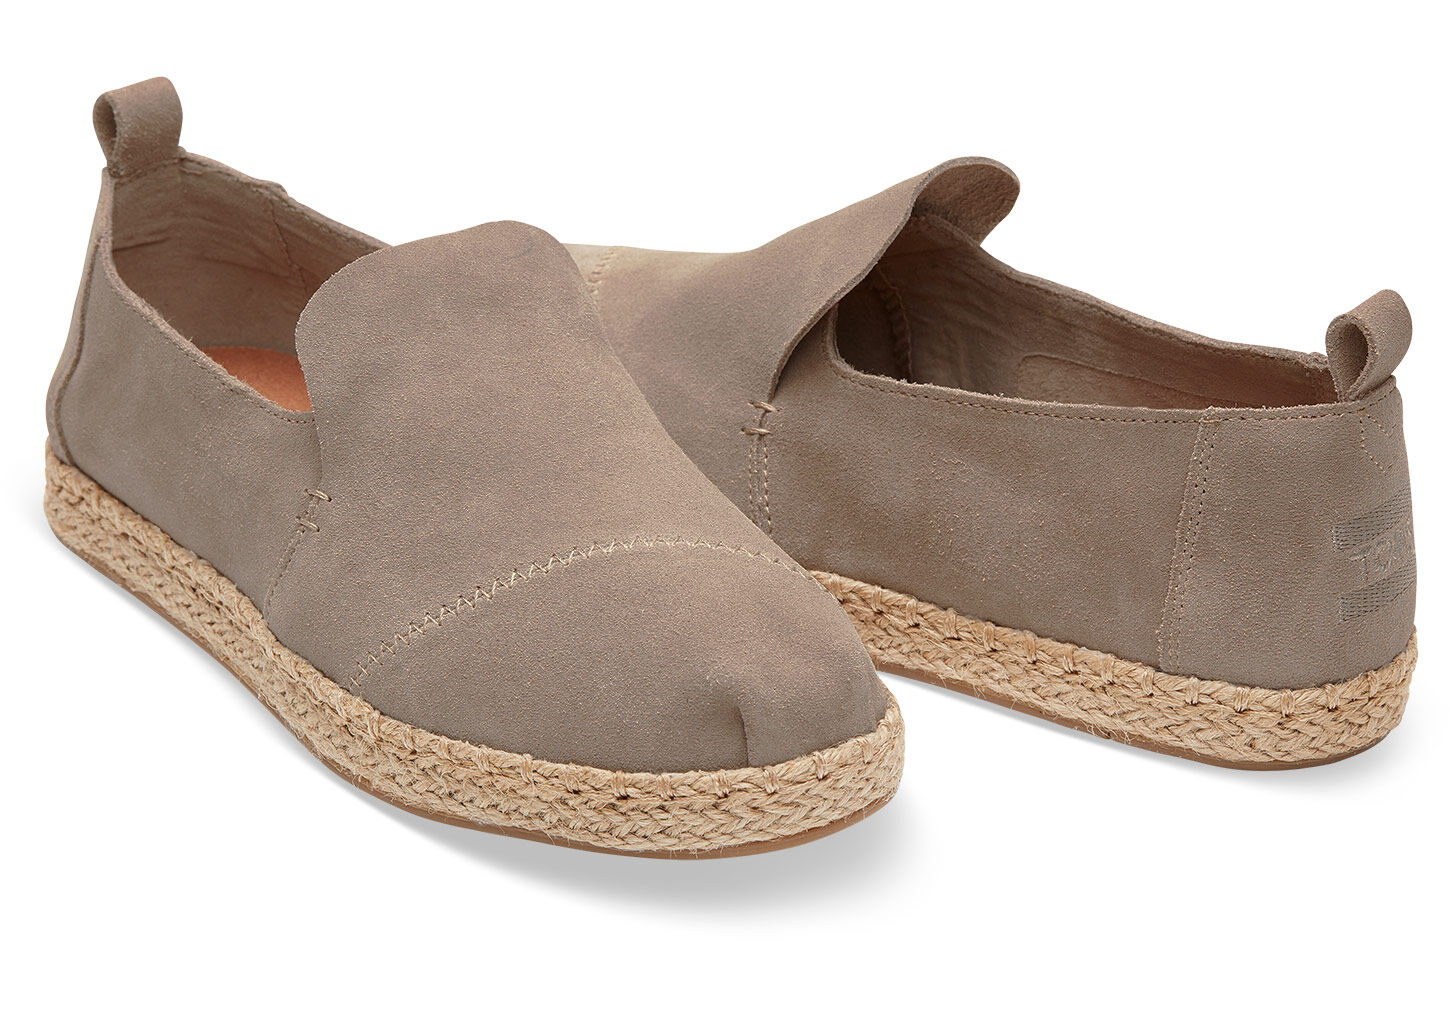 toms toffee suede crepe women's classics